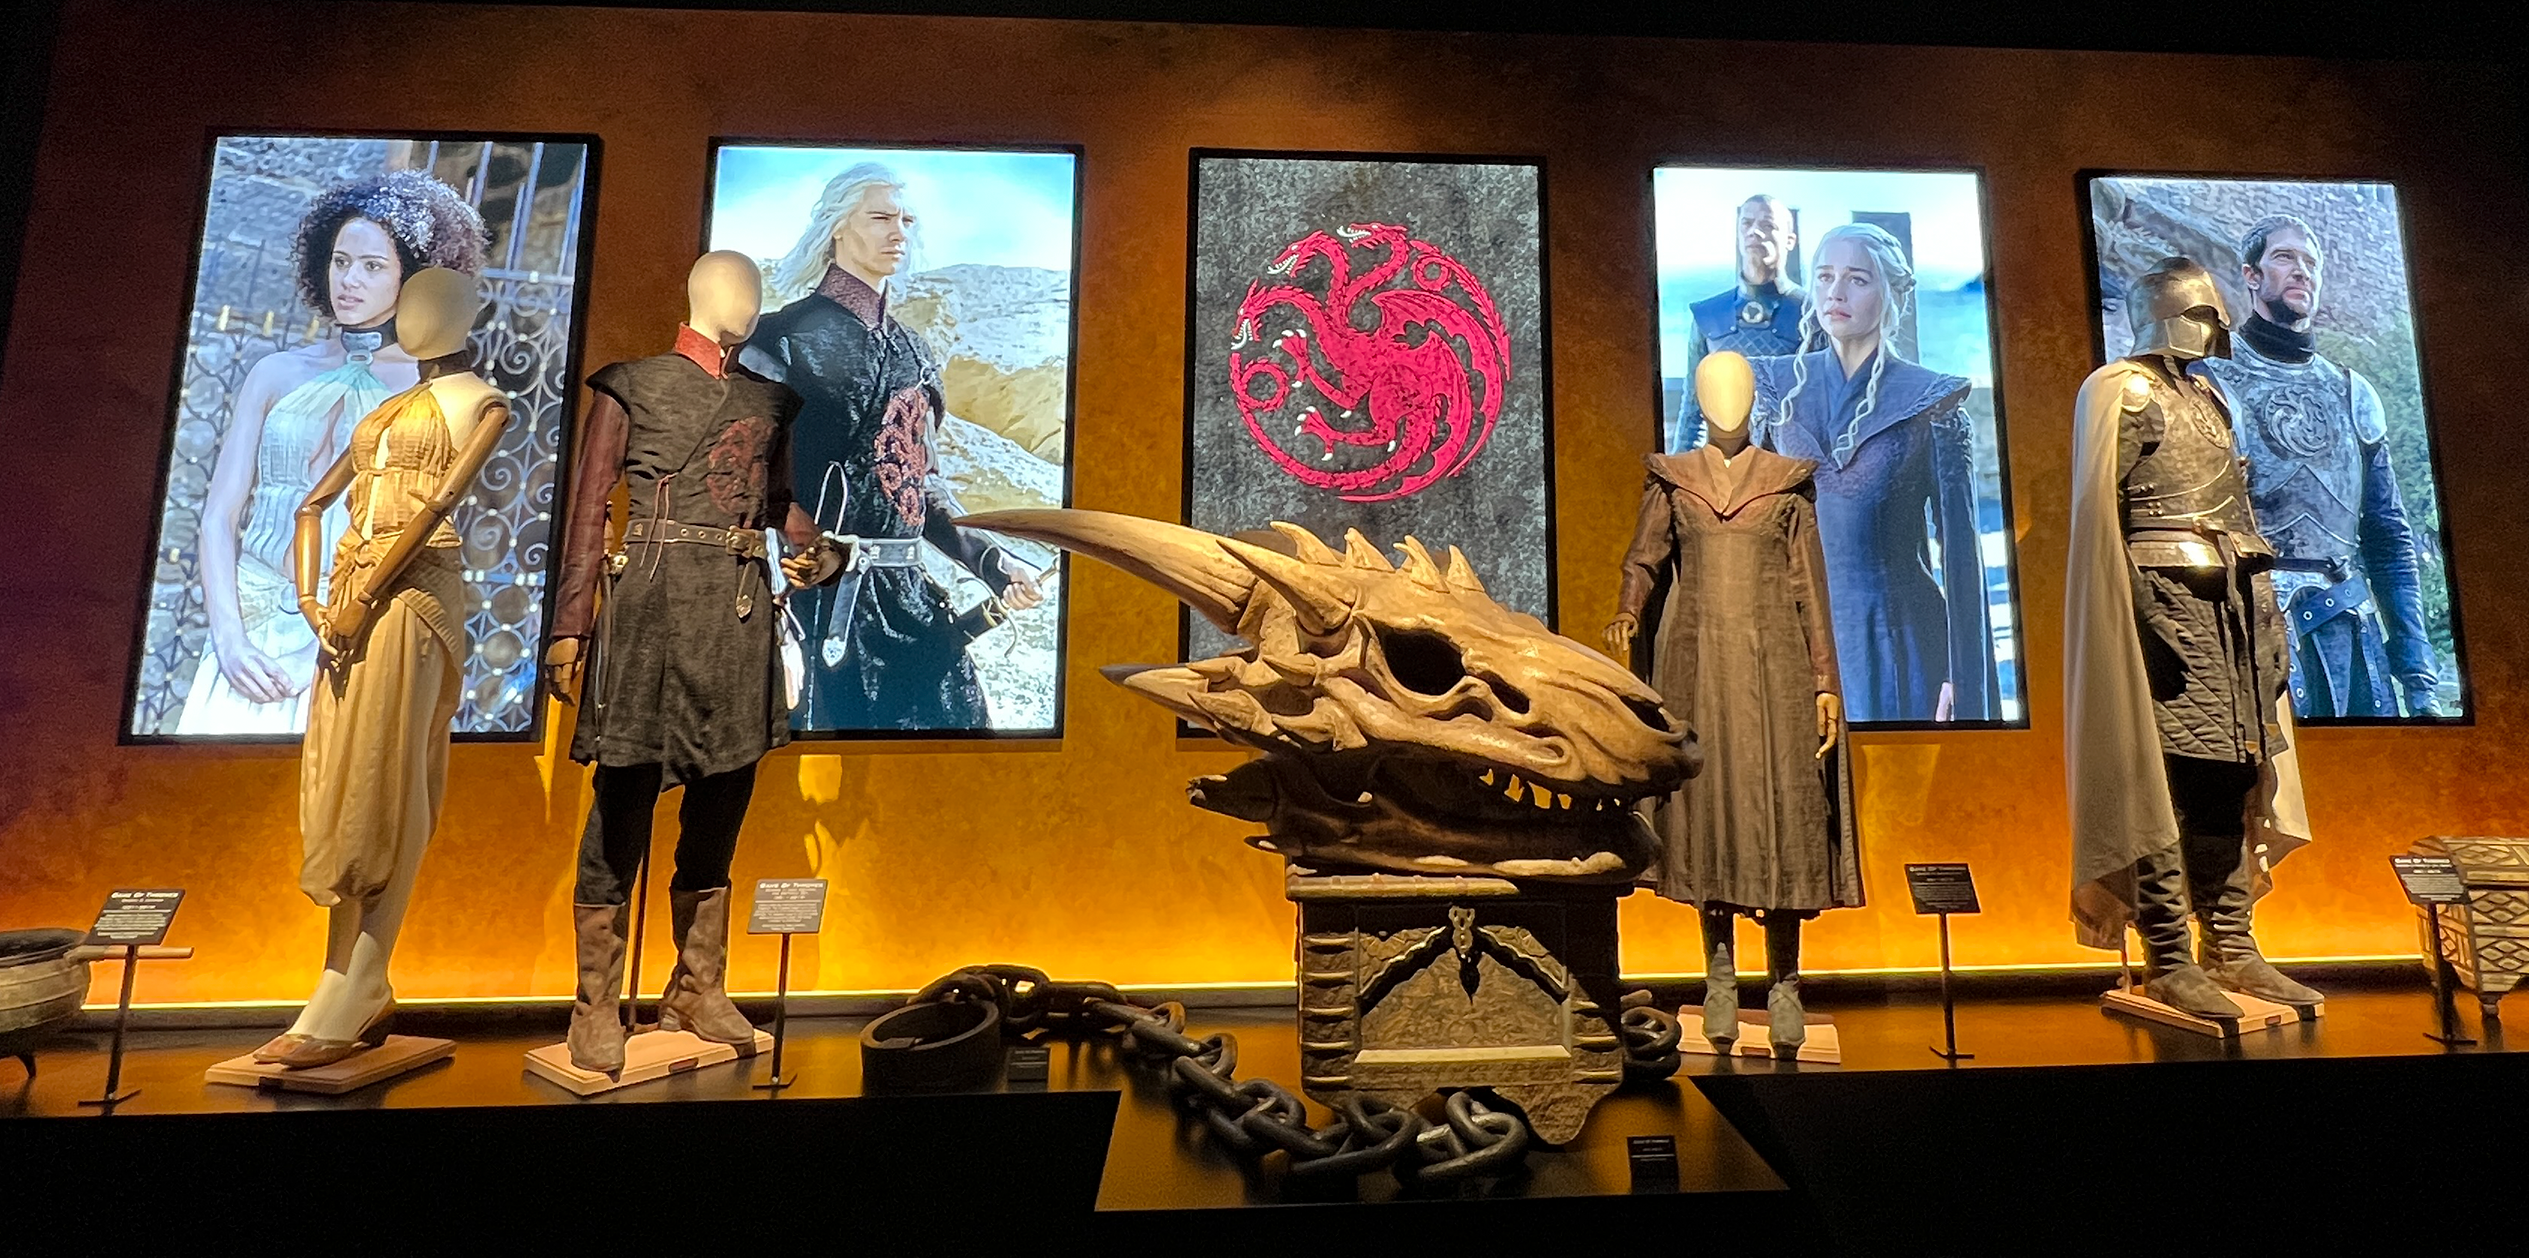 New Game of Thrones Exhibit Opens at Warner Bros. Studio Tour Hollywood